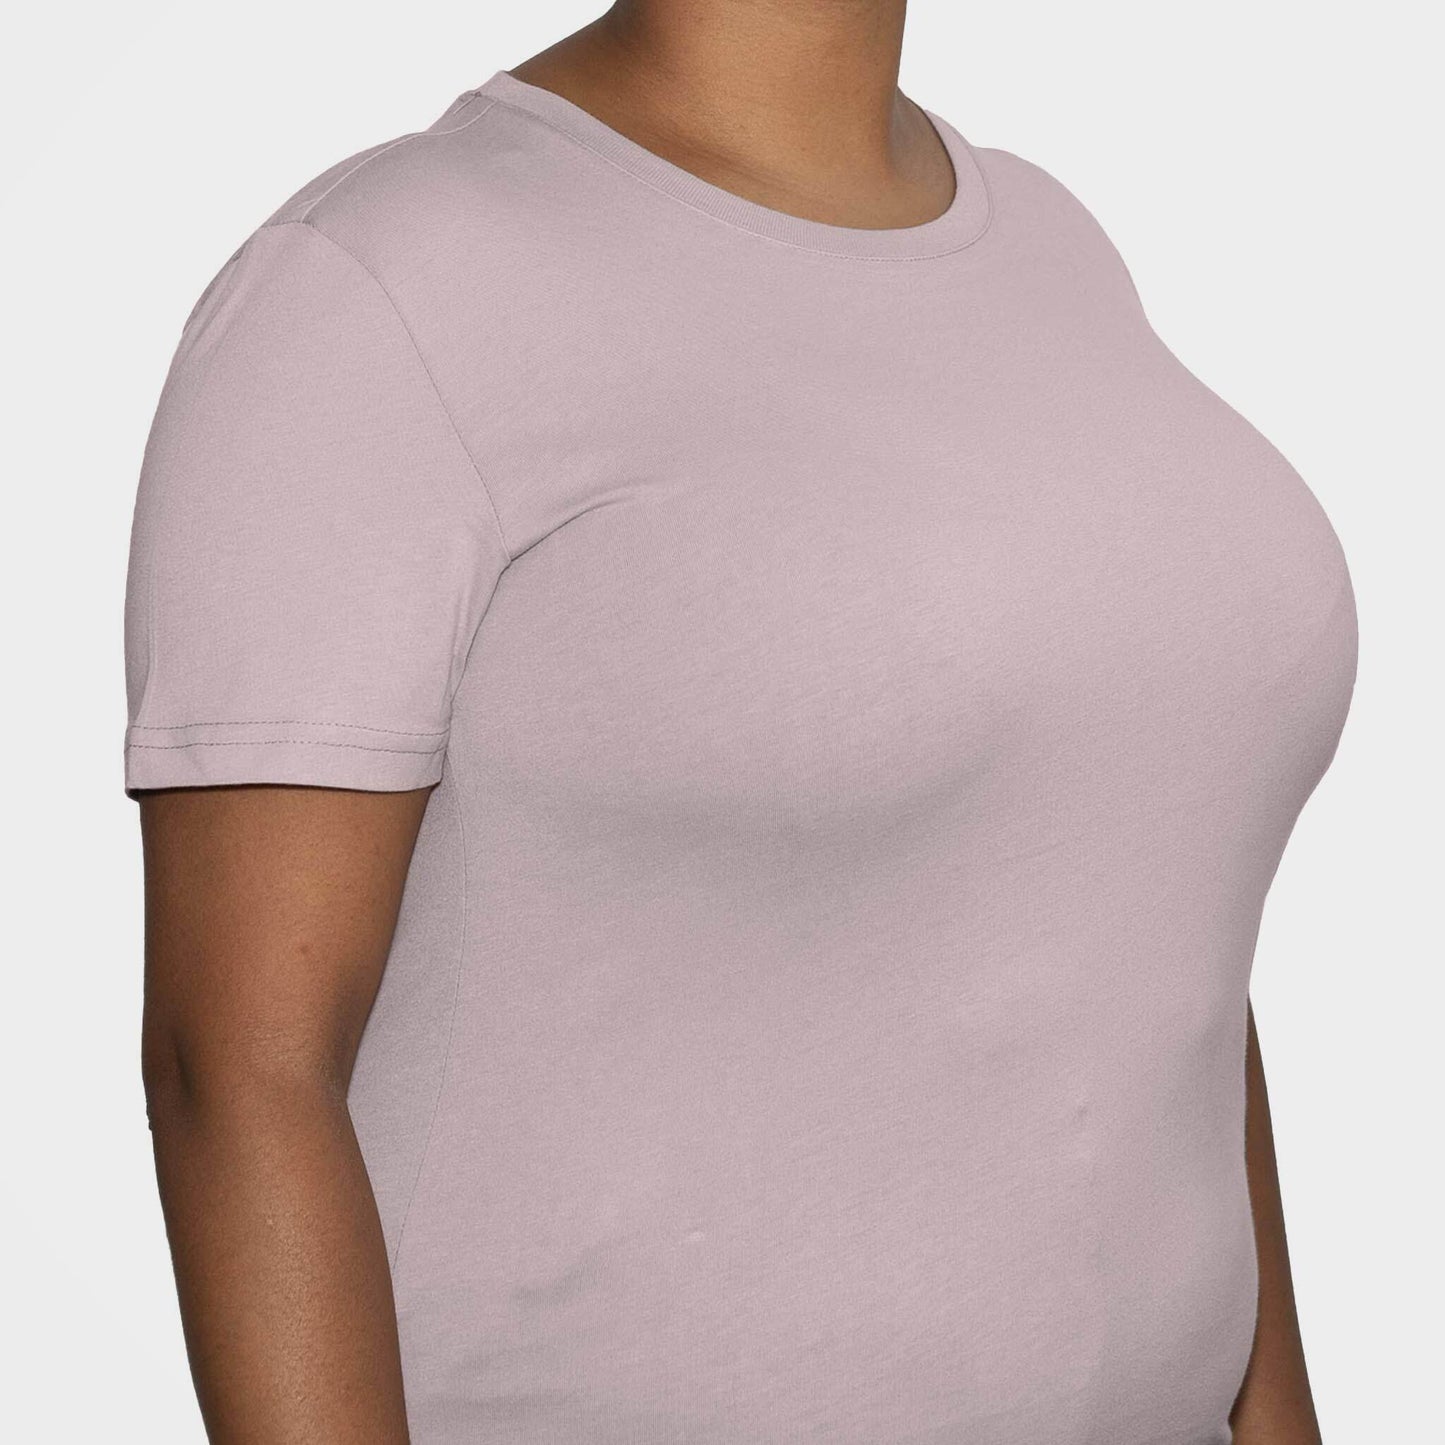 5 Pack | Women’s T-Shirts, Recycled Cotton, Sand